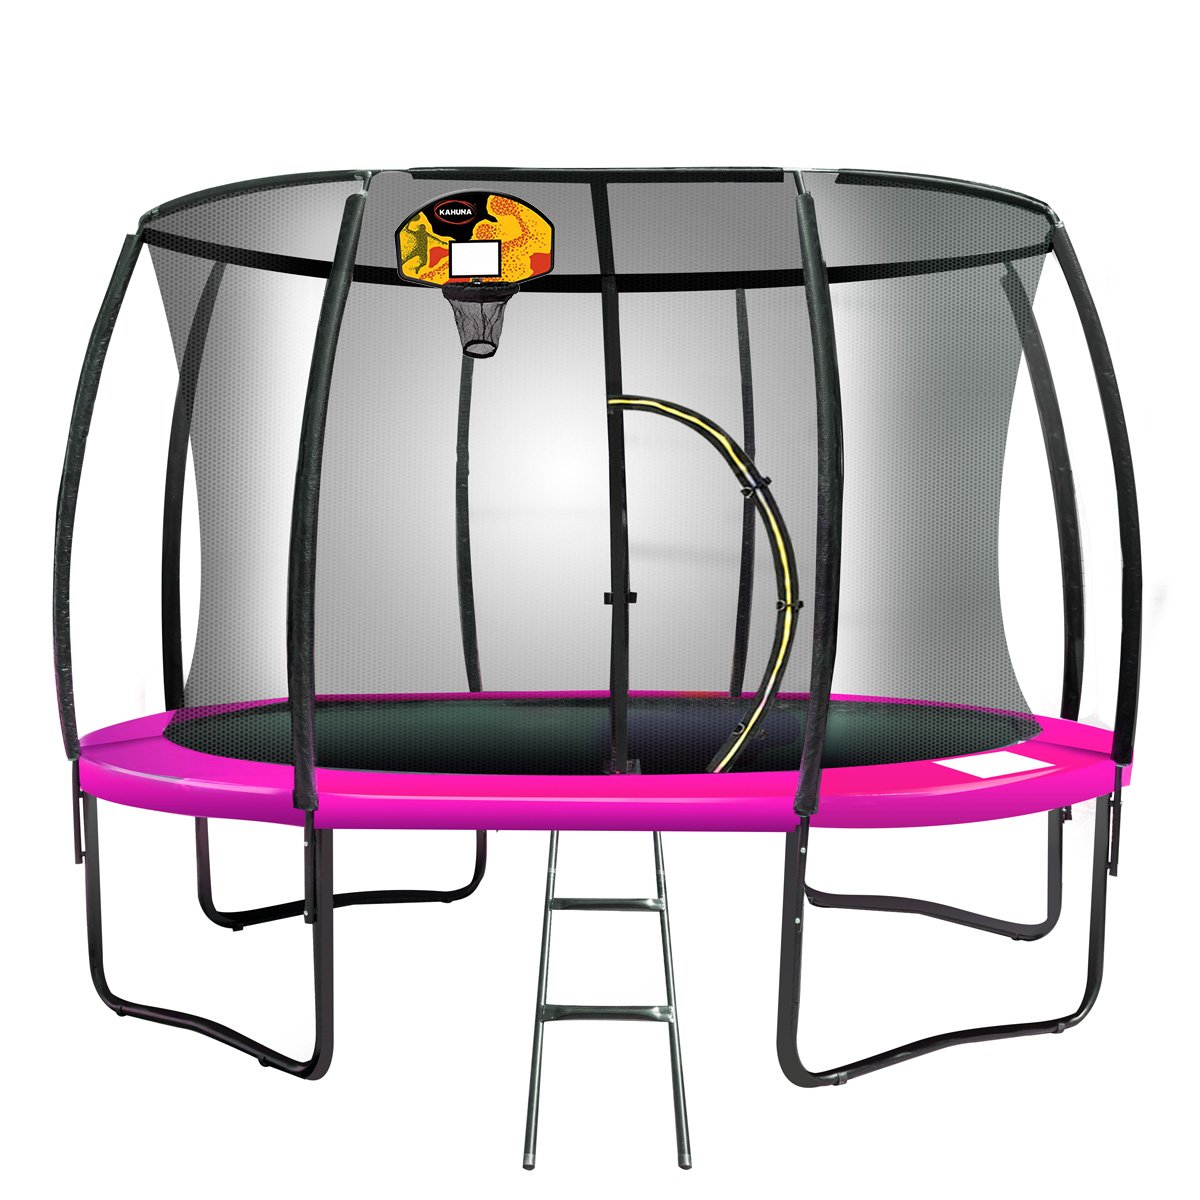 Kahuna 10ft Outdoor Trampoline With Safety Enclosure Pad Ladder Basketball Hoop Set Pink - SILBERSHELL